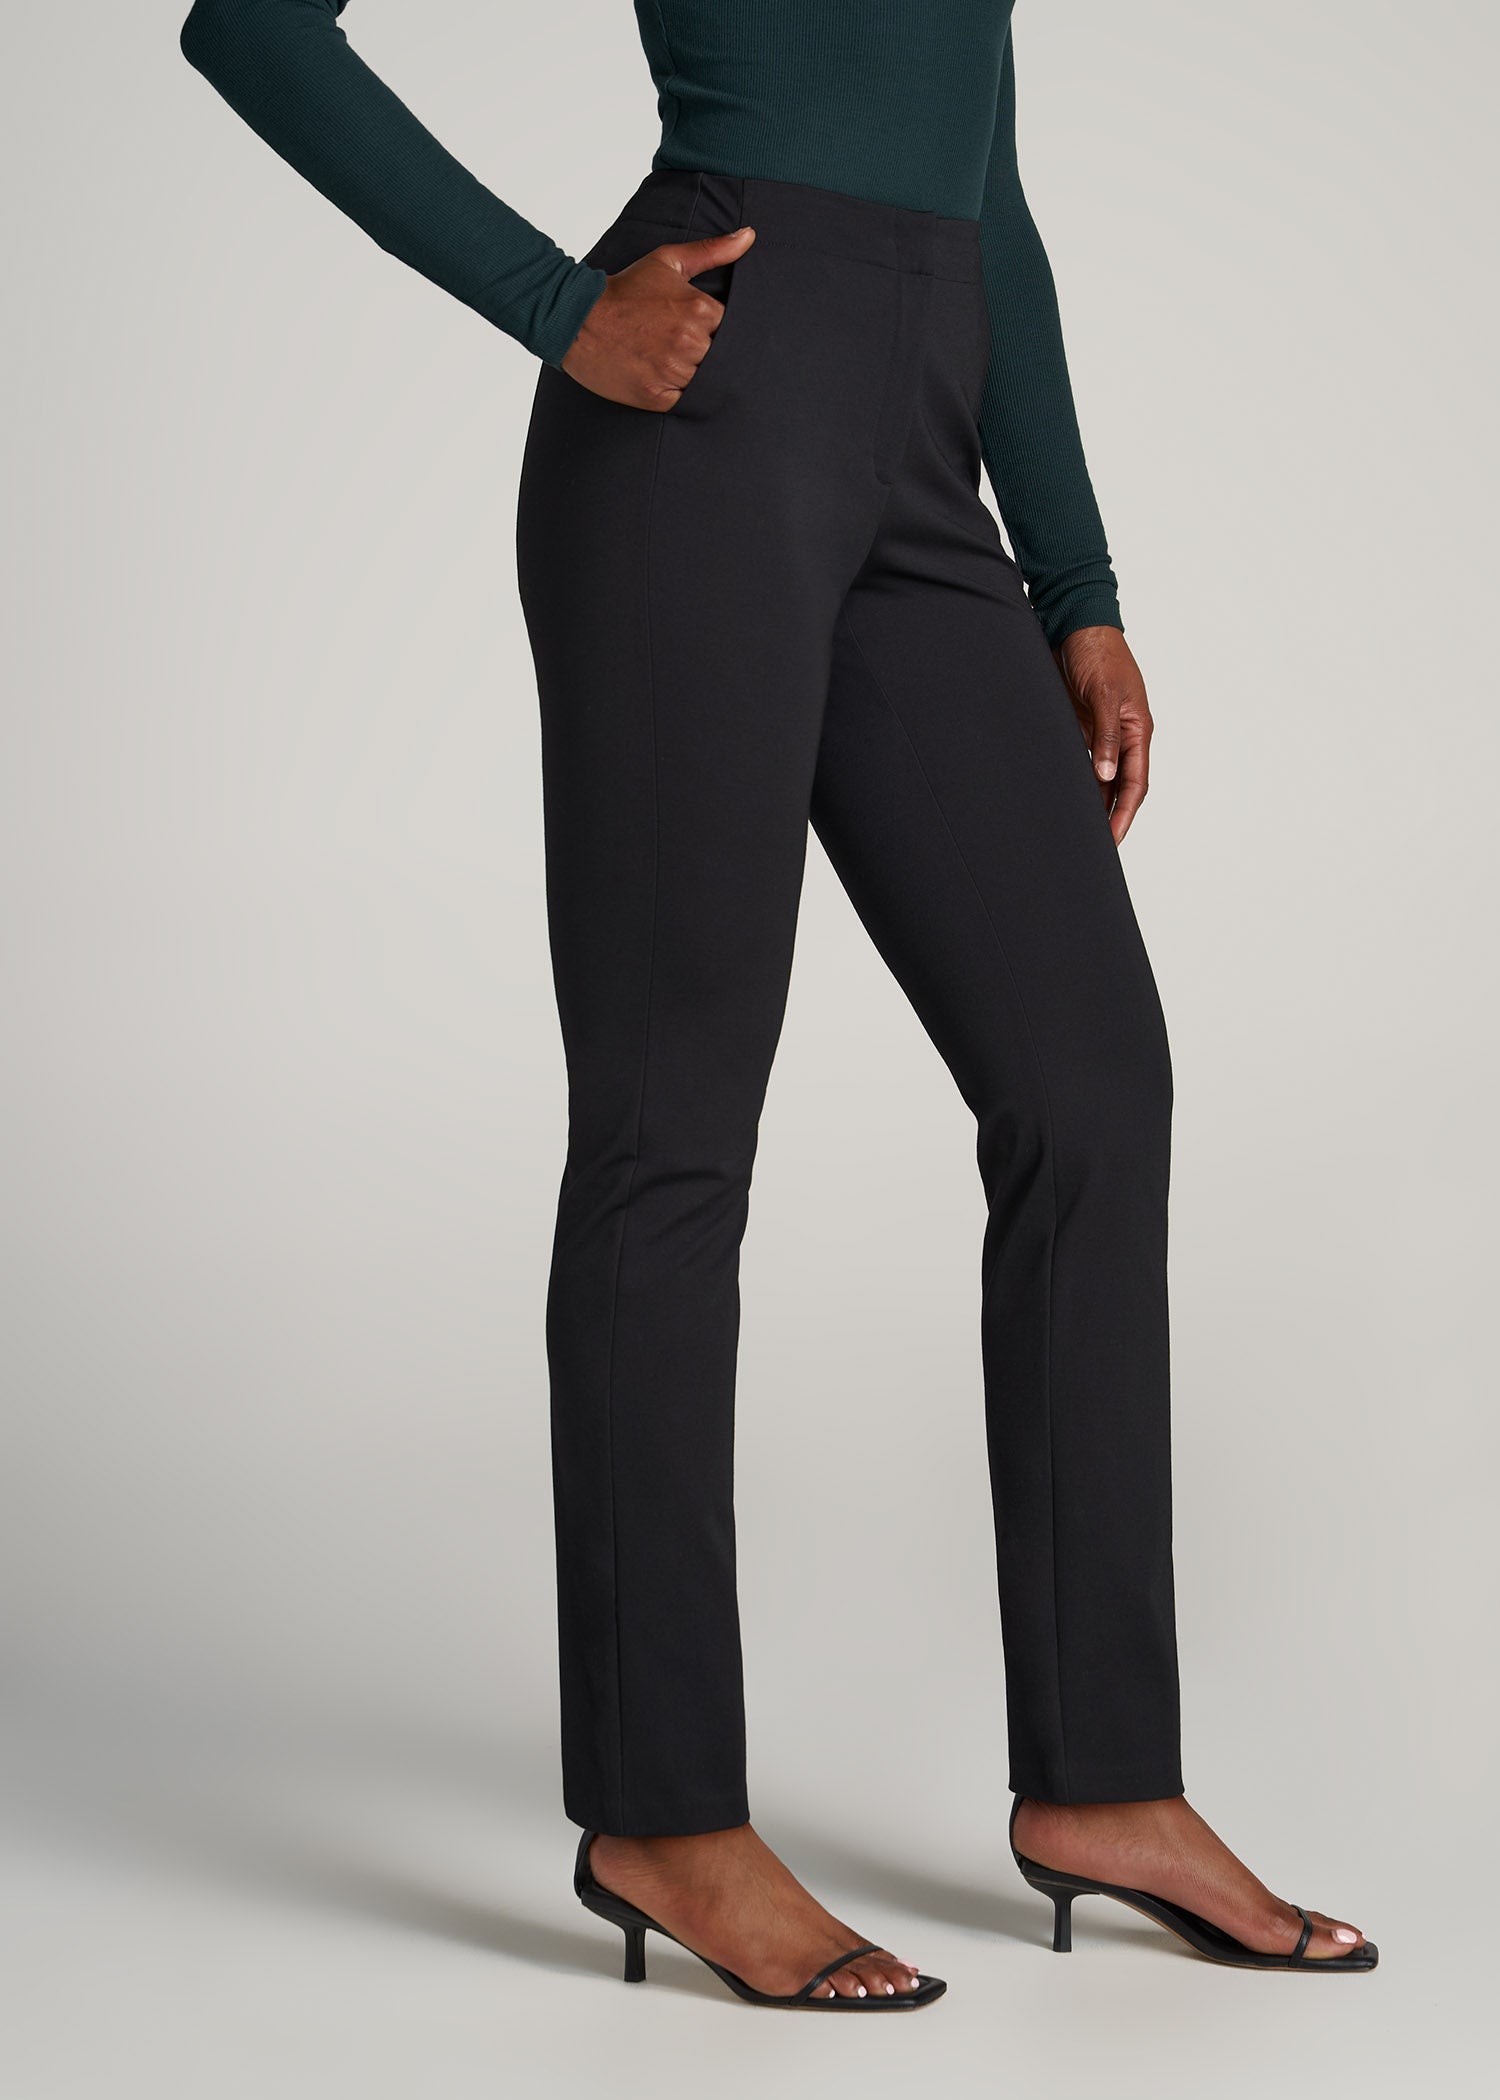 Business Casual Pants for Women | Old Navy